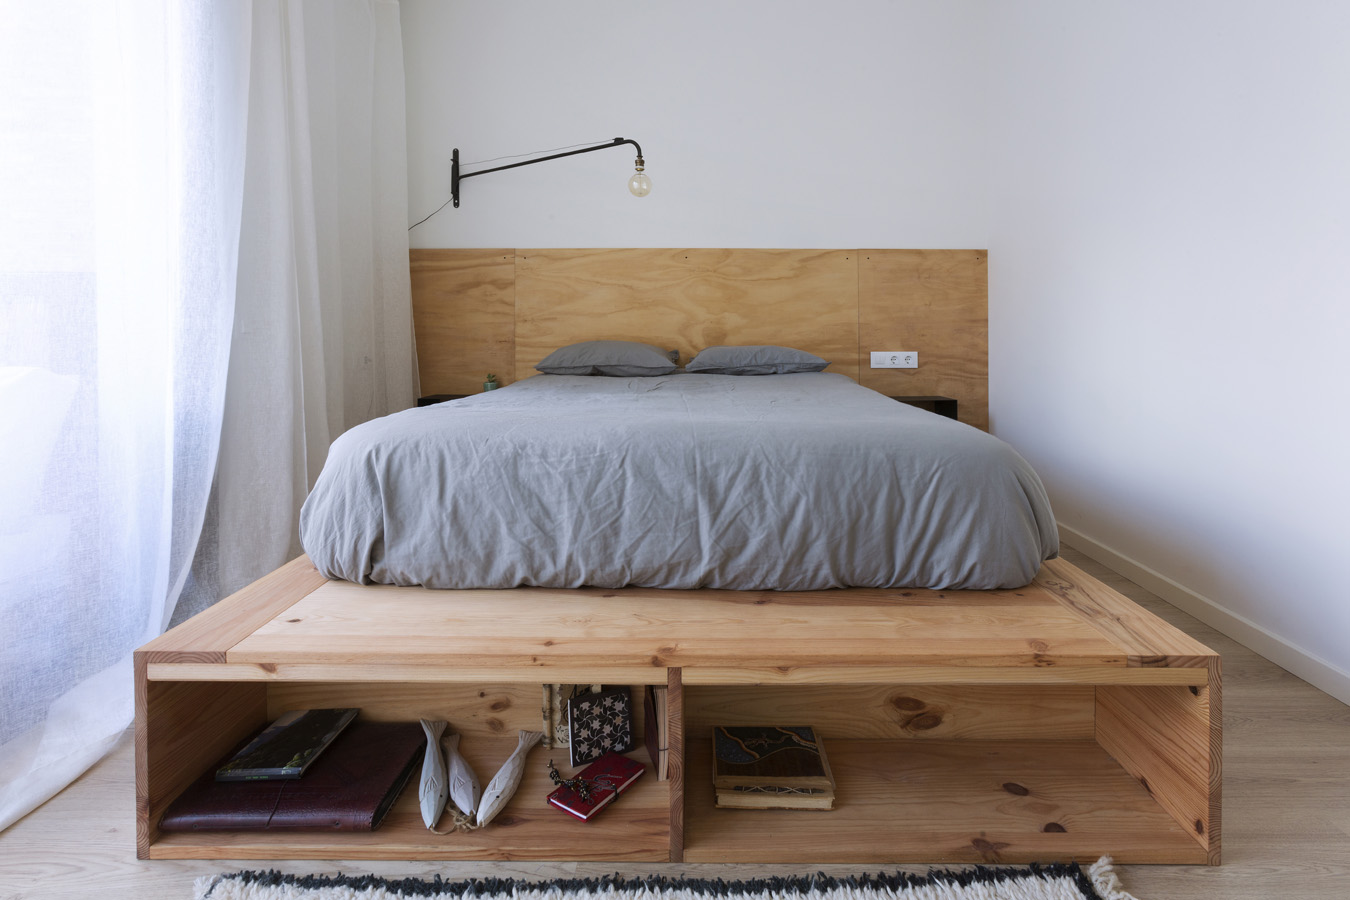 wooden double bed in stylish interior setting